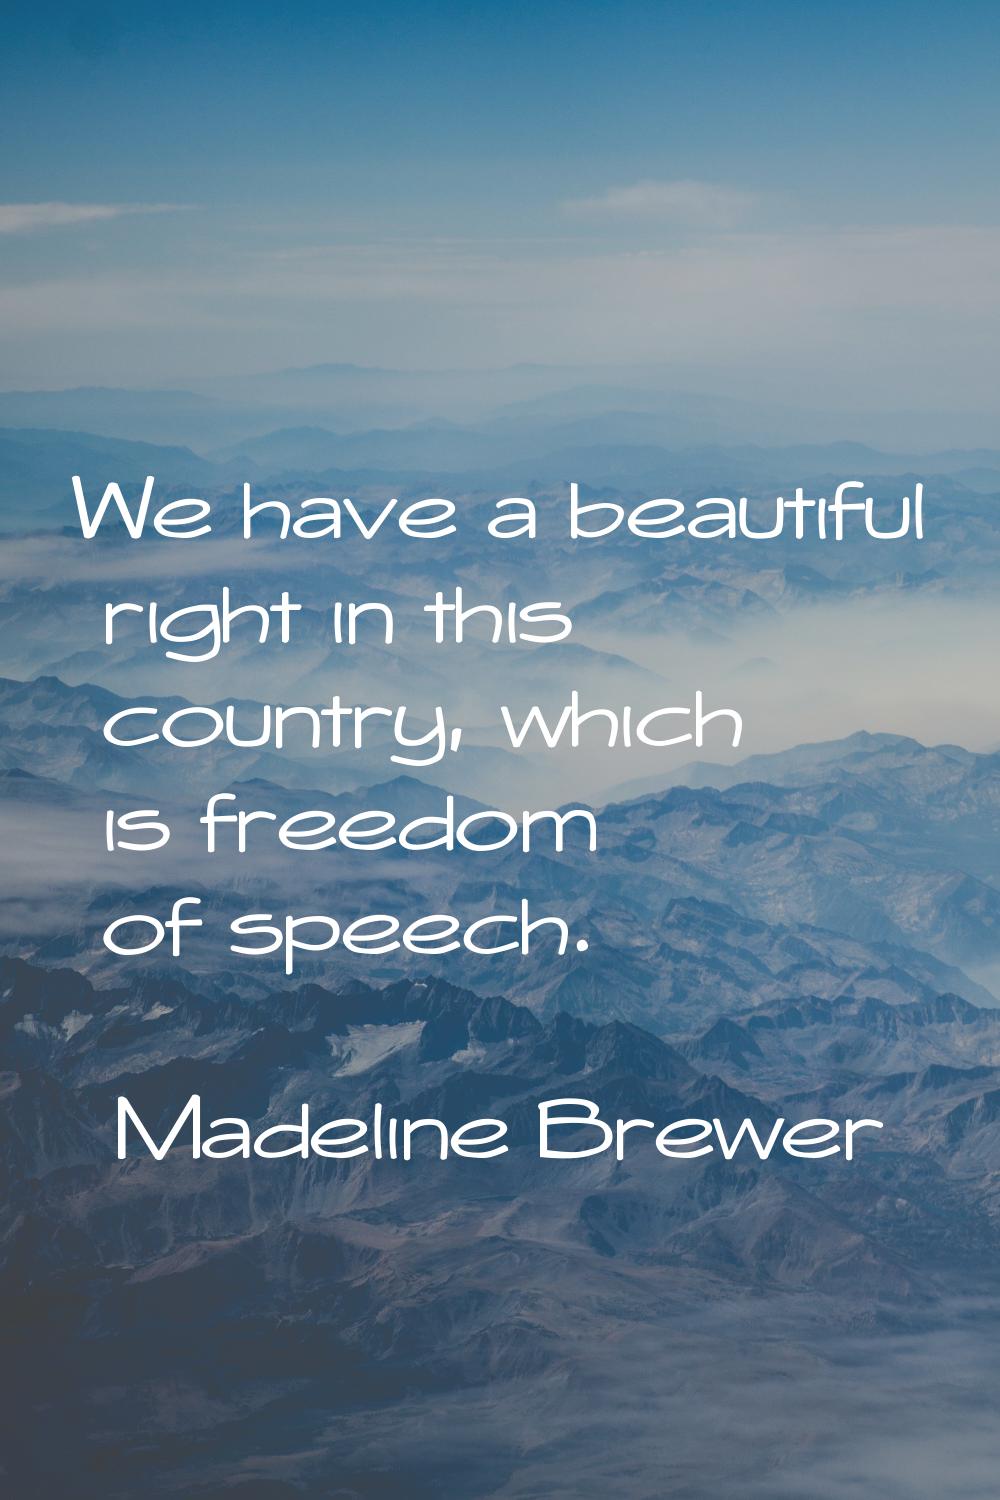 We have a beautiful right in this country, which is freedom of speech.